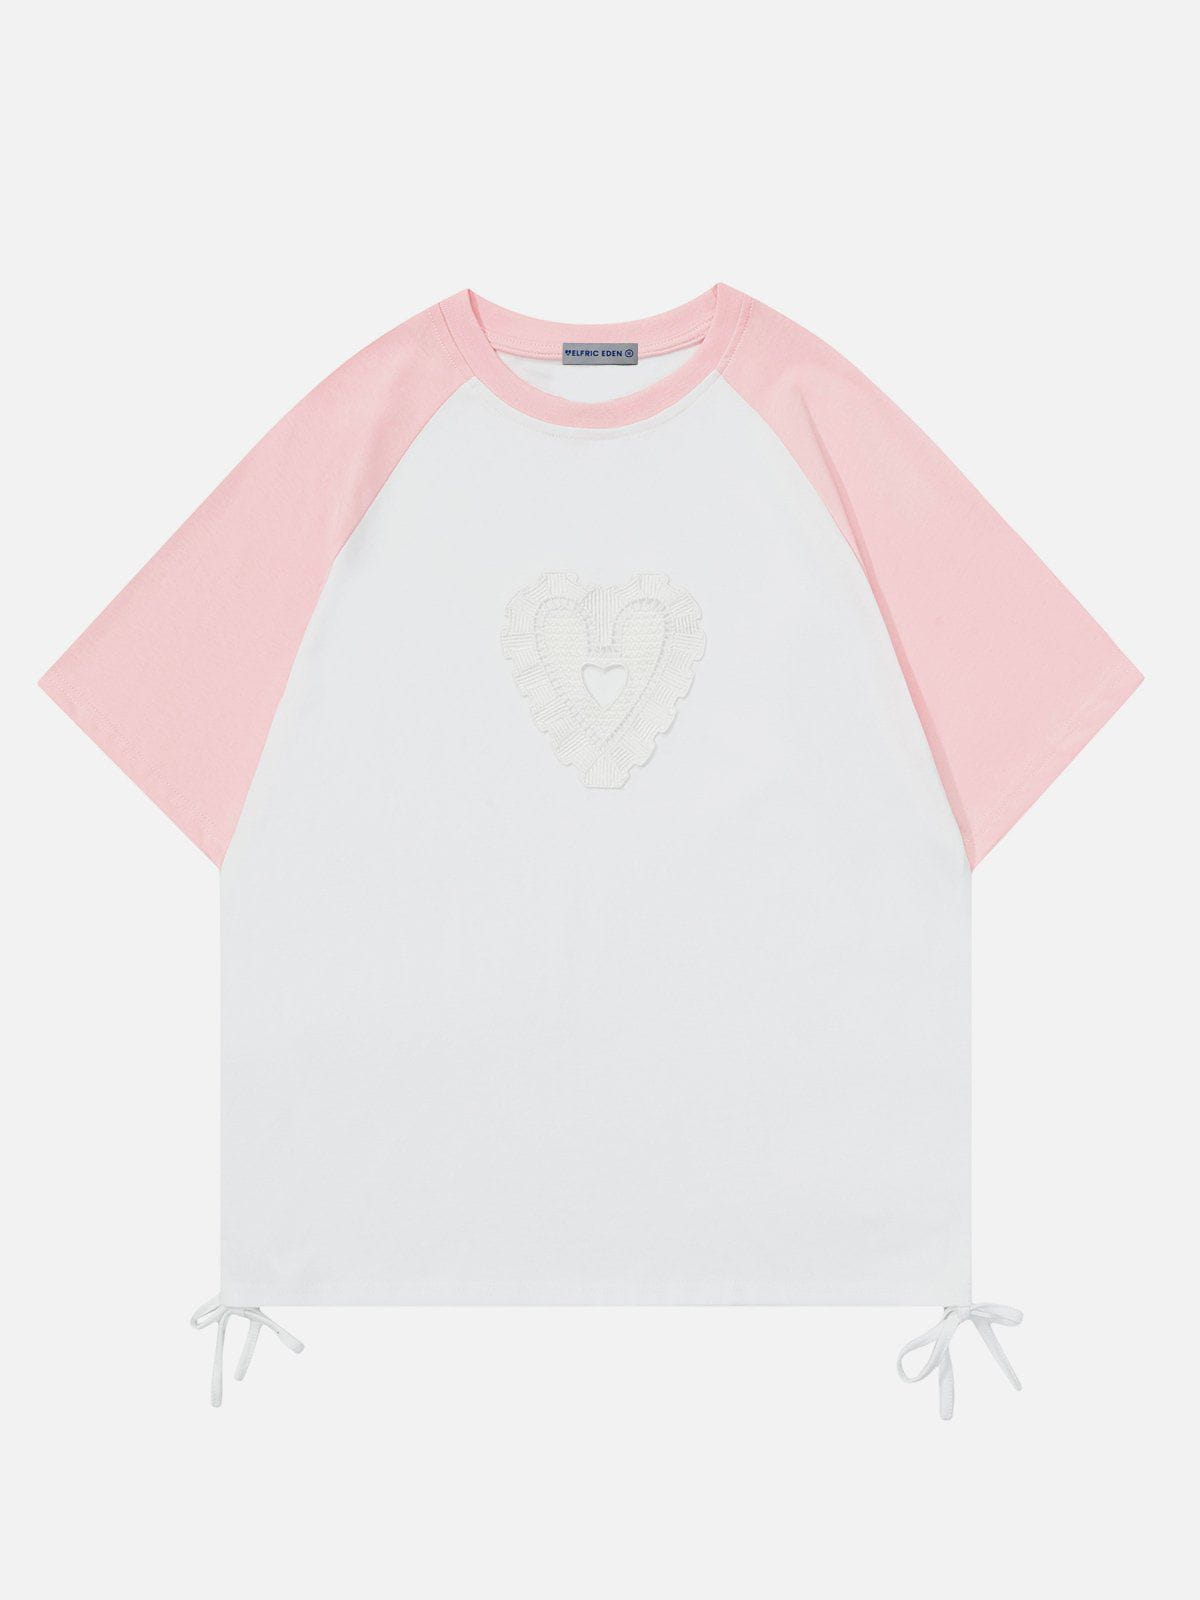 Aelfric Eden Embroidery Heart Tee